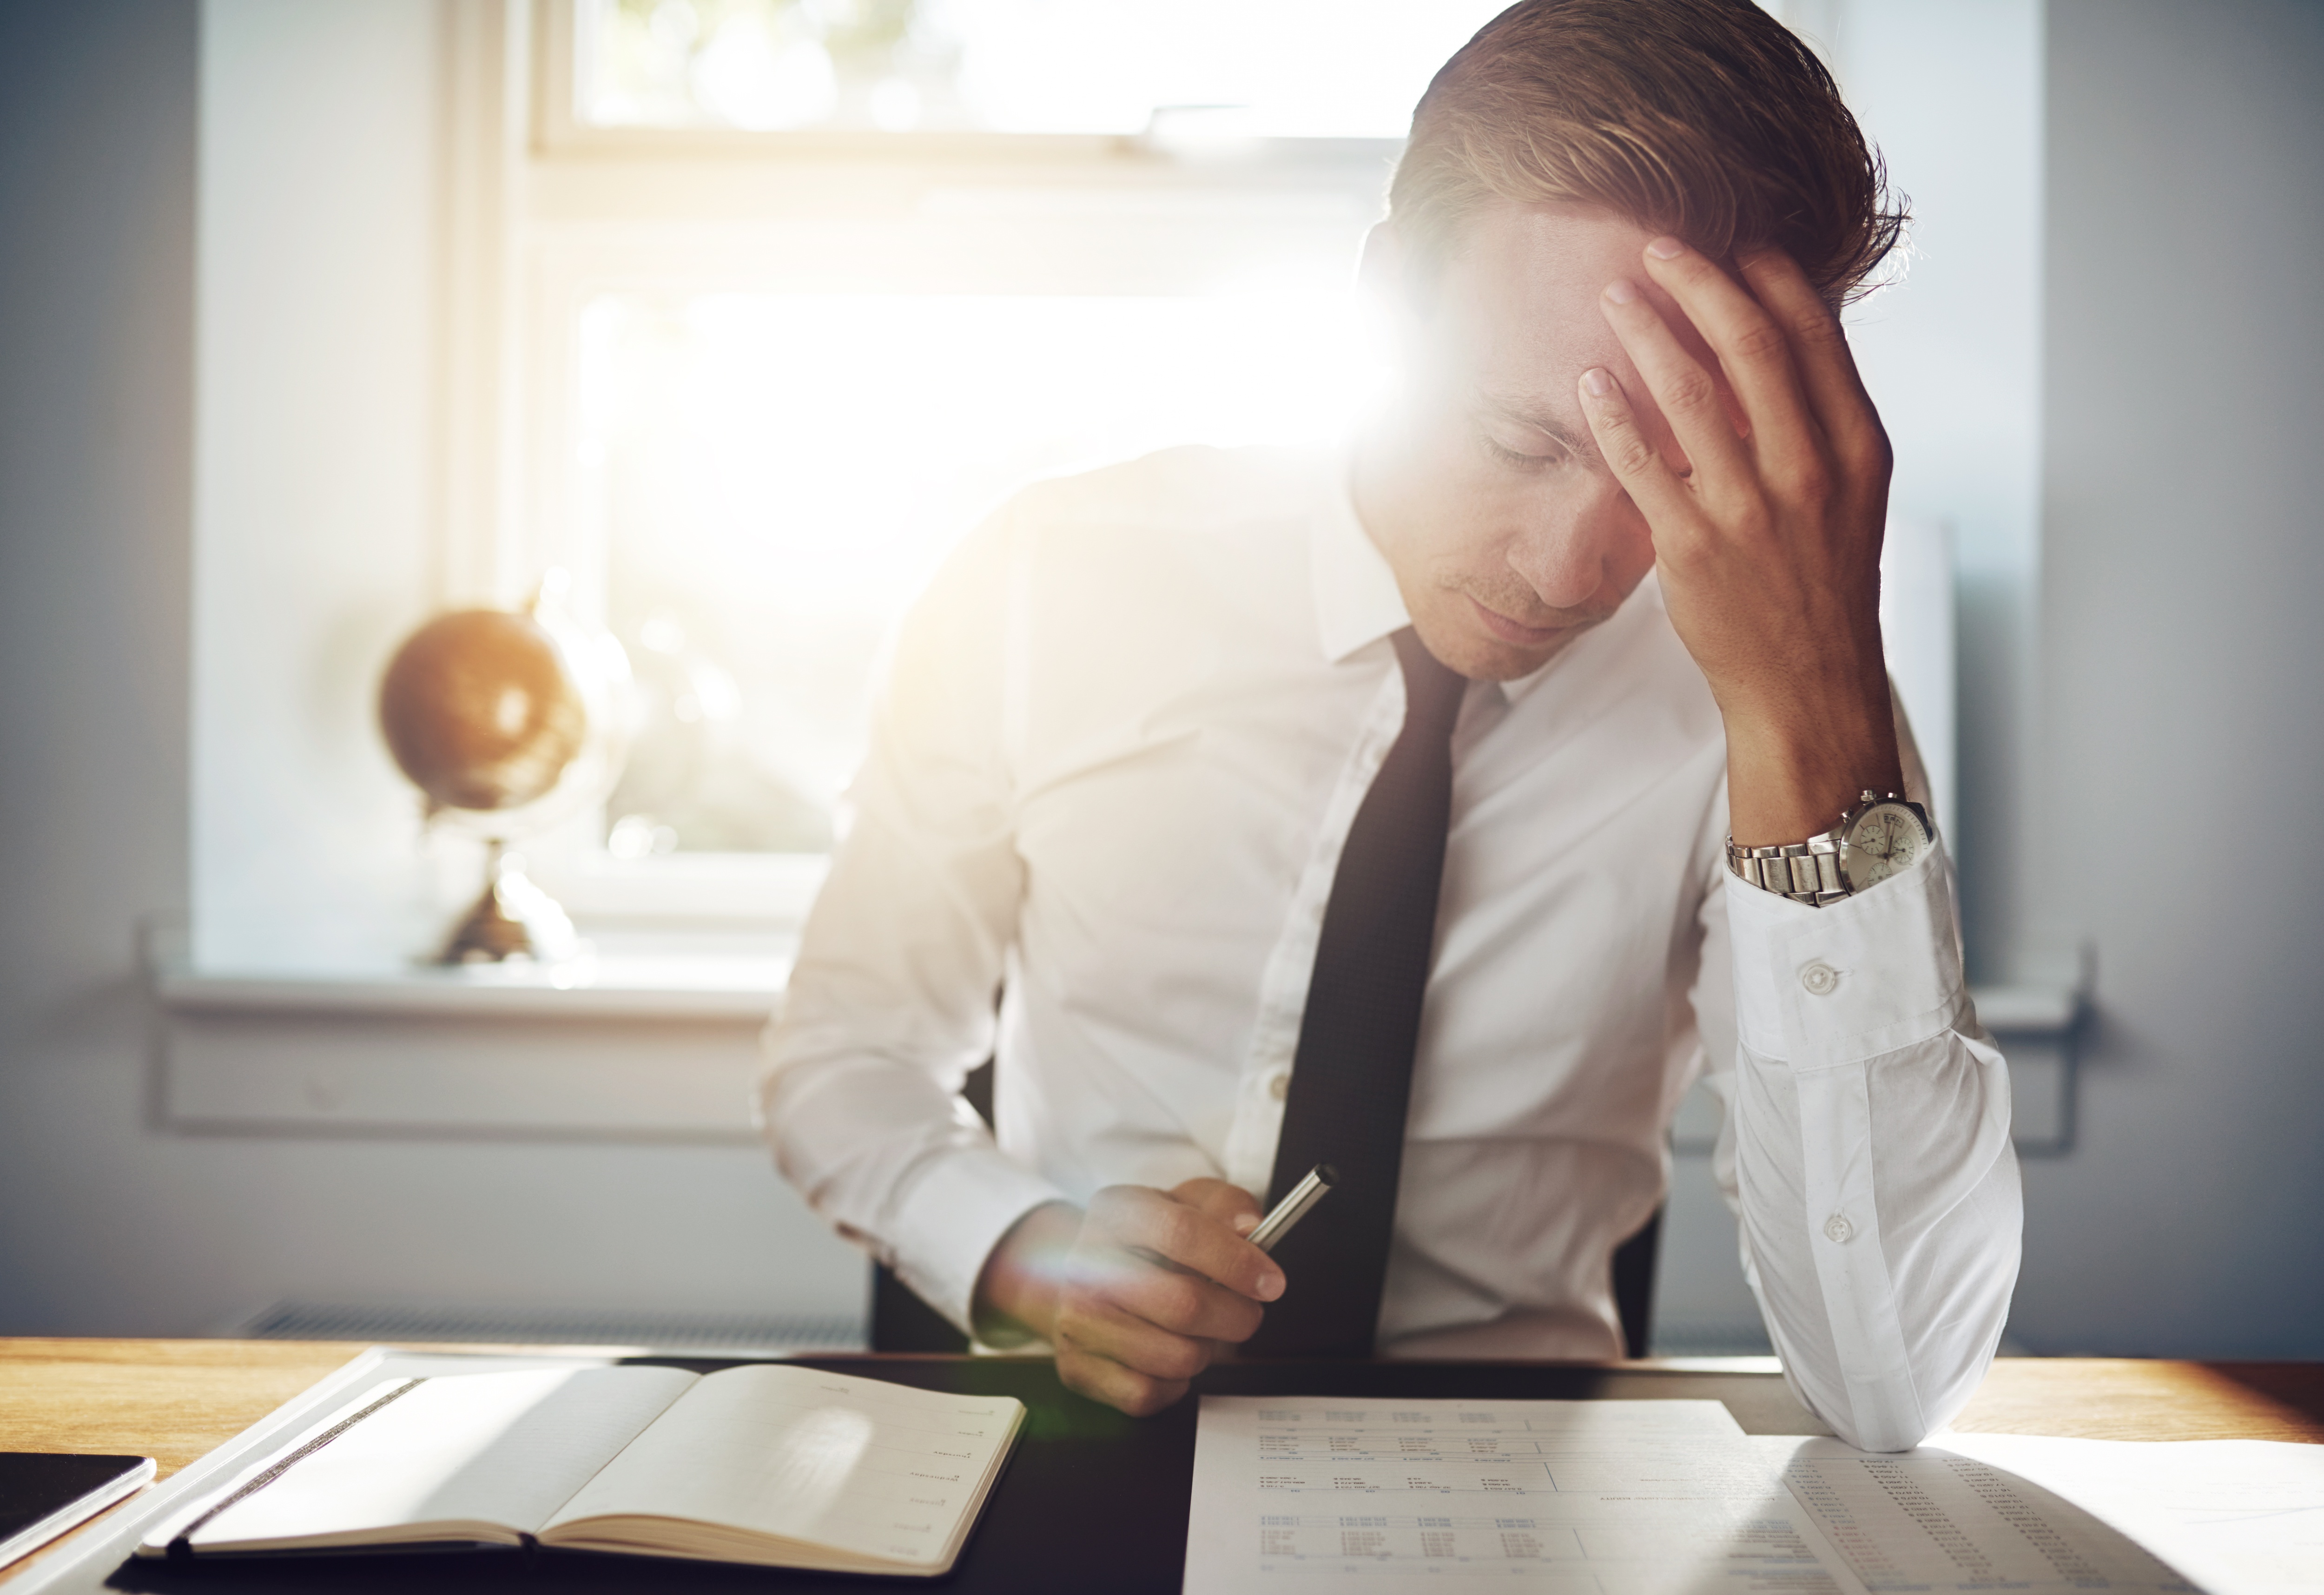 The Top 5 Problems Faced in Accounting